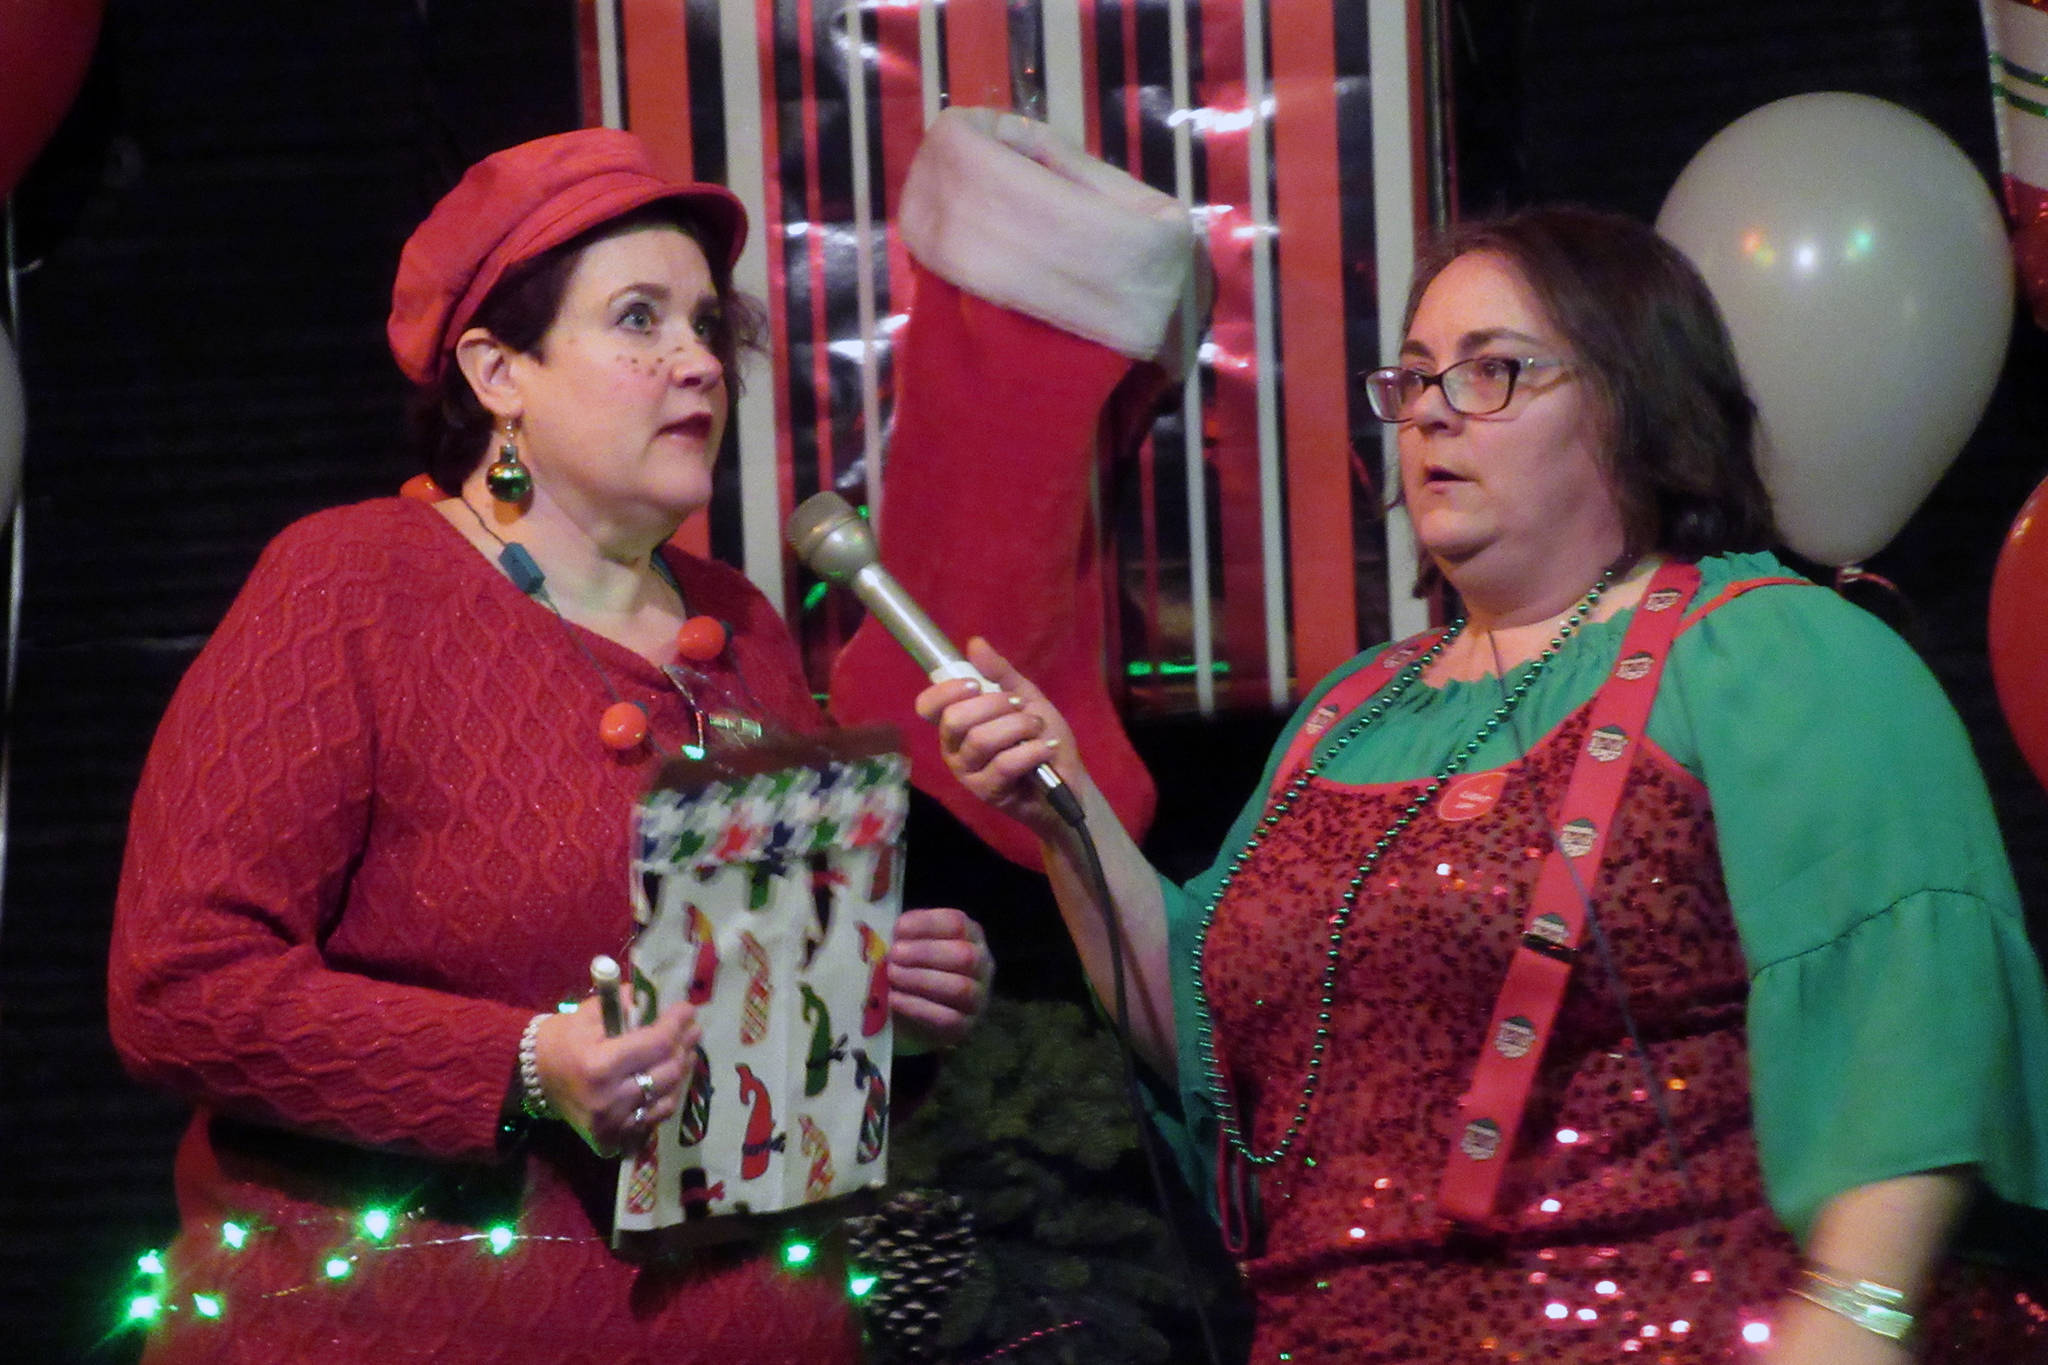 Christmas Extravaganza packs theater, draws laughs